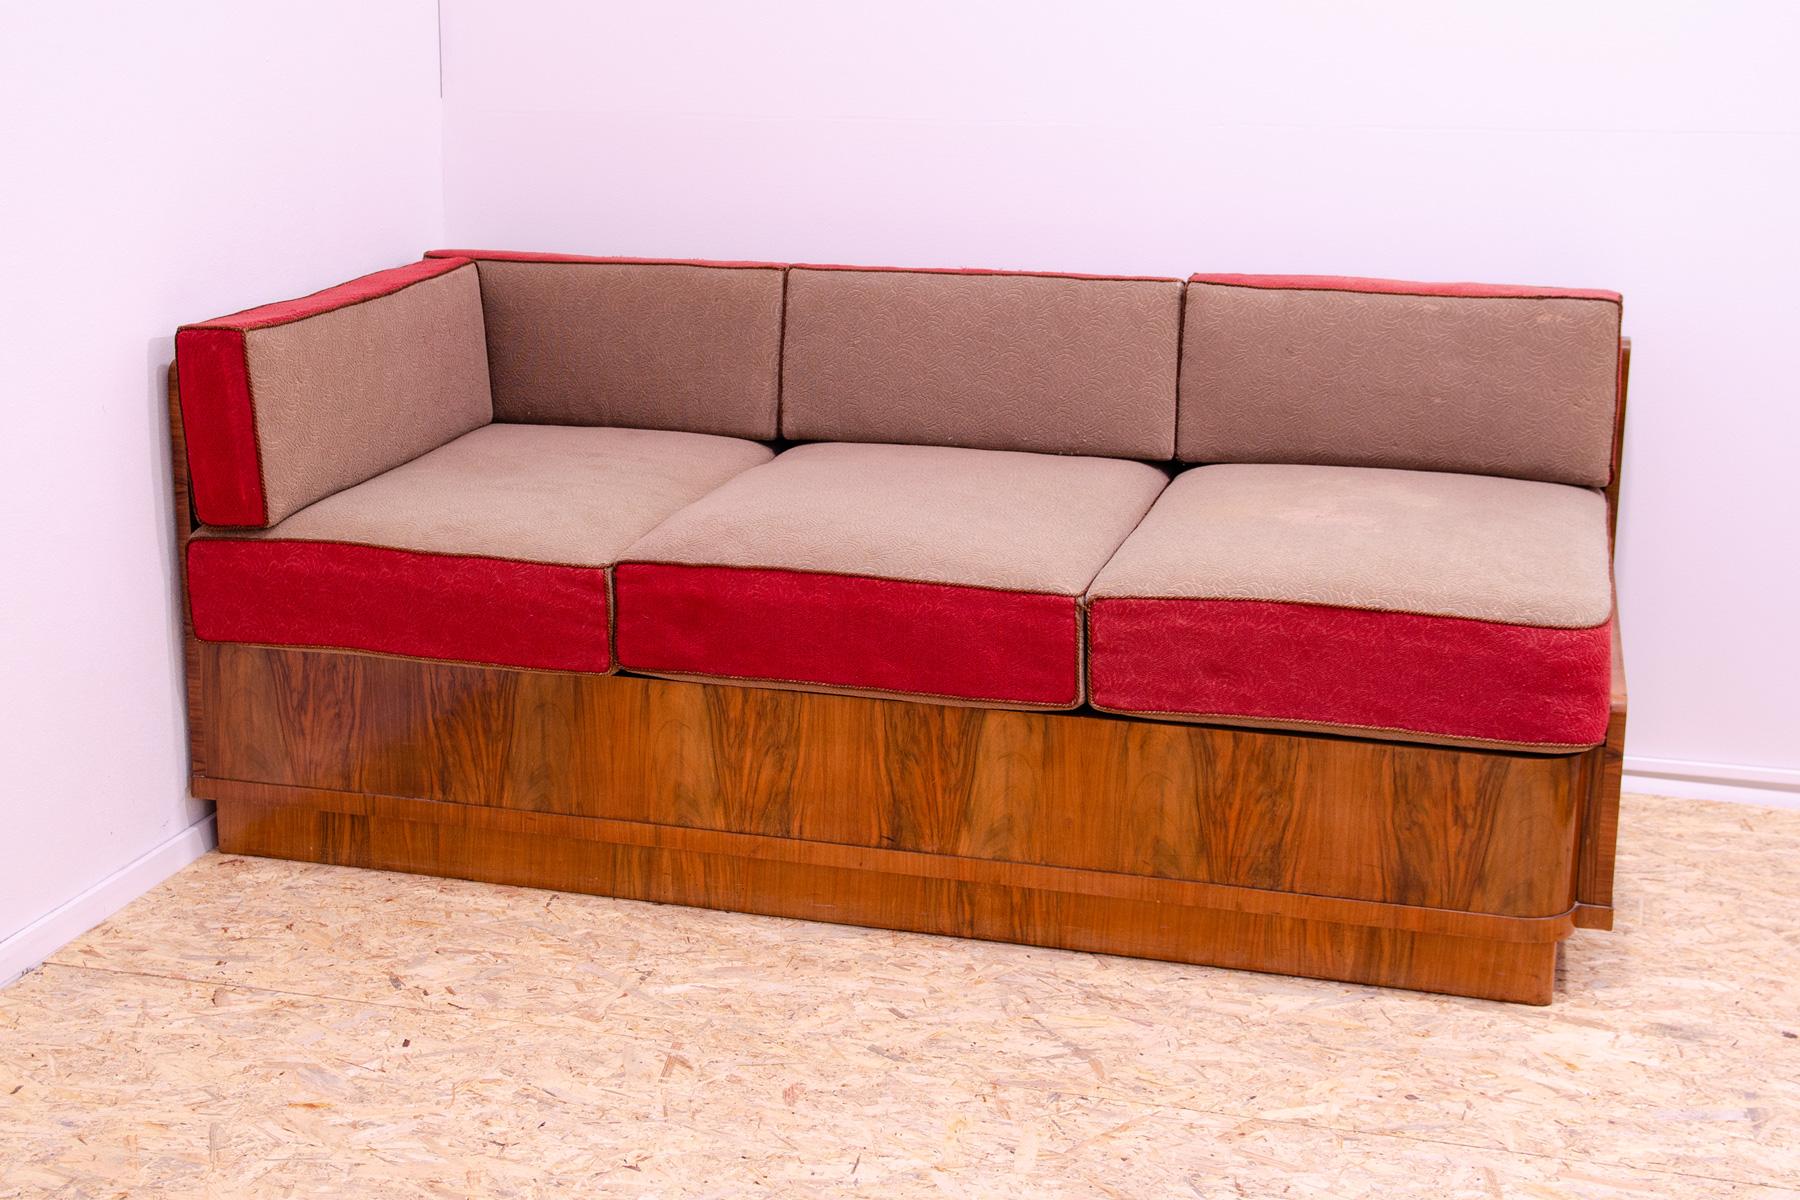 This ART DECO style sofa with a storage space was designed and made in the 1930´s in the former Czechoslovakia.
This simple design fits into the context of the design creation in Czechoslovakia between 1930´s-1950´s.
It features a walnut veneer that